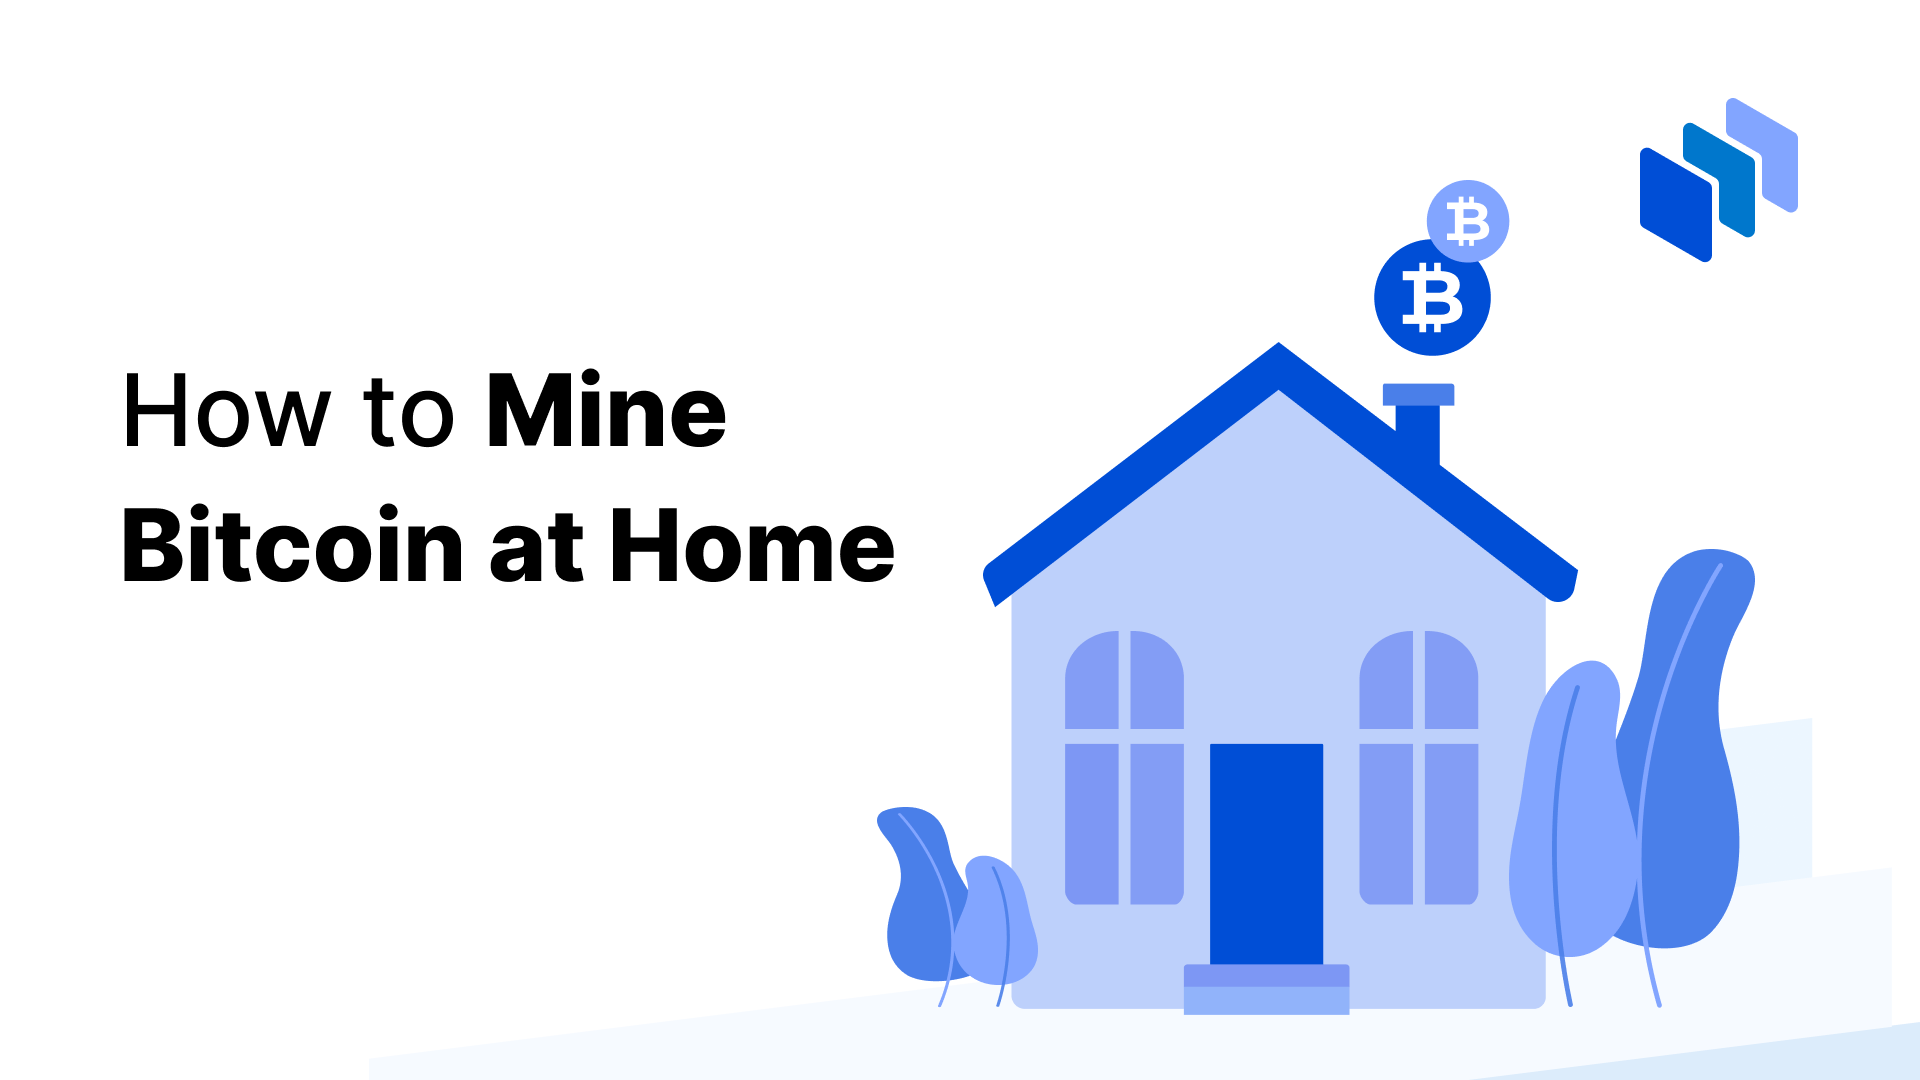 How to Mine Bitcoin at Home